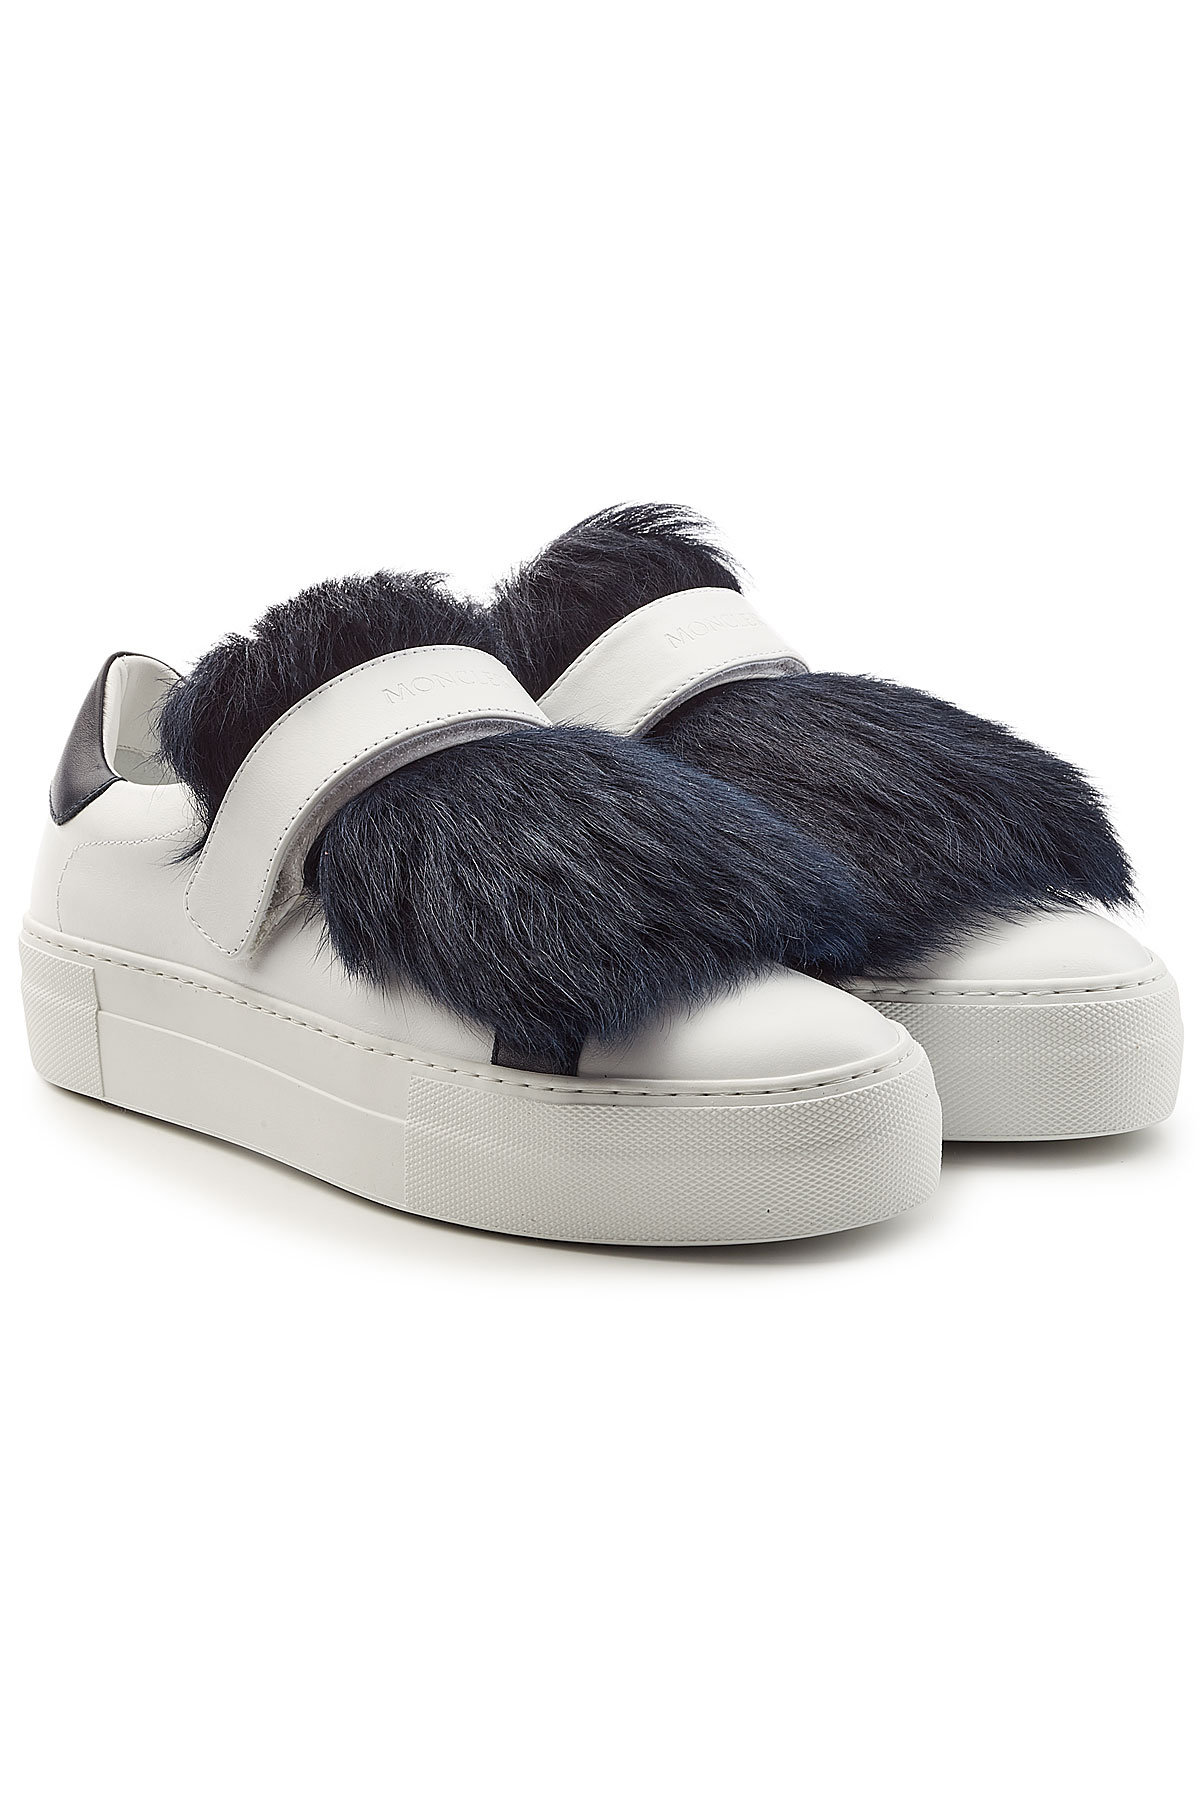 Moncler - Victoire Leather Sneakers with Lamb Fur